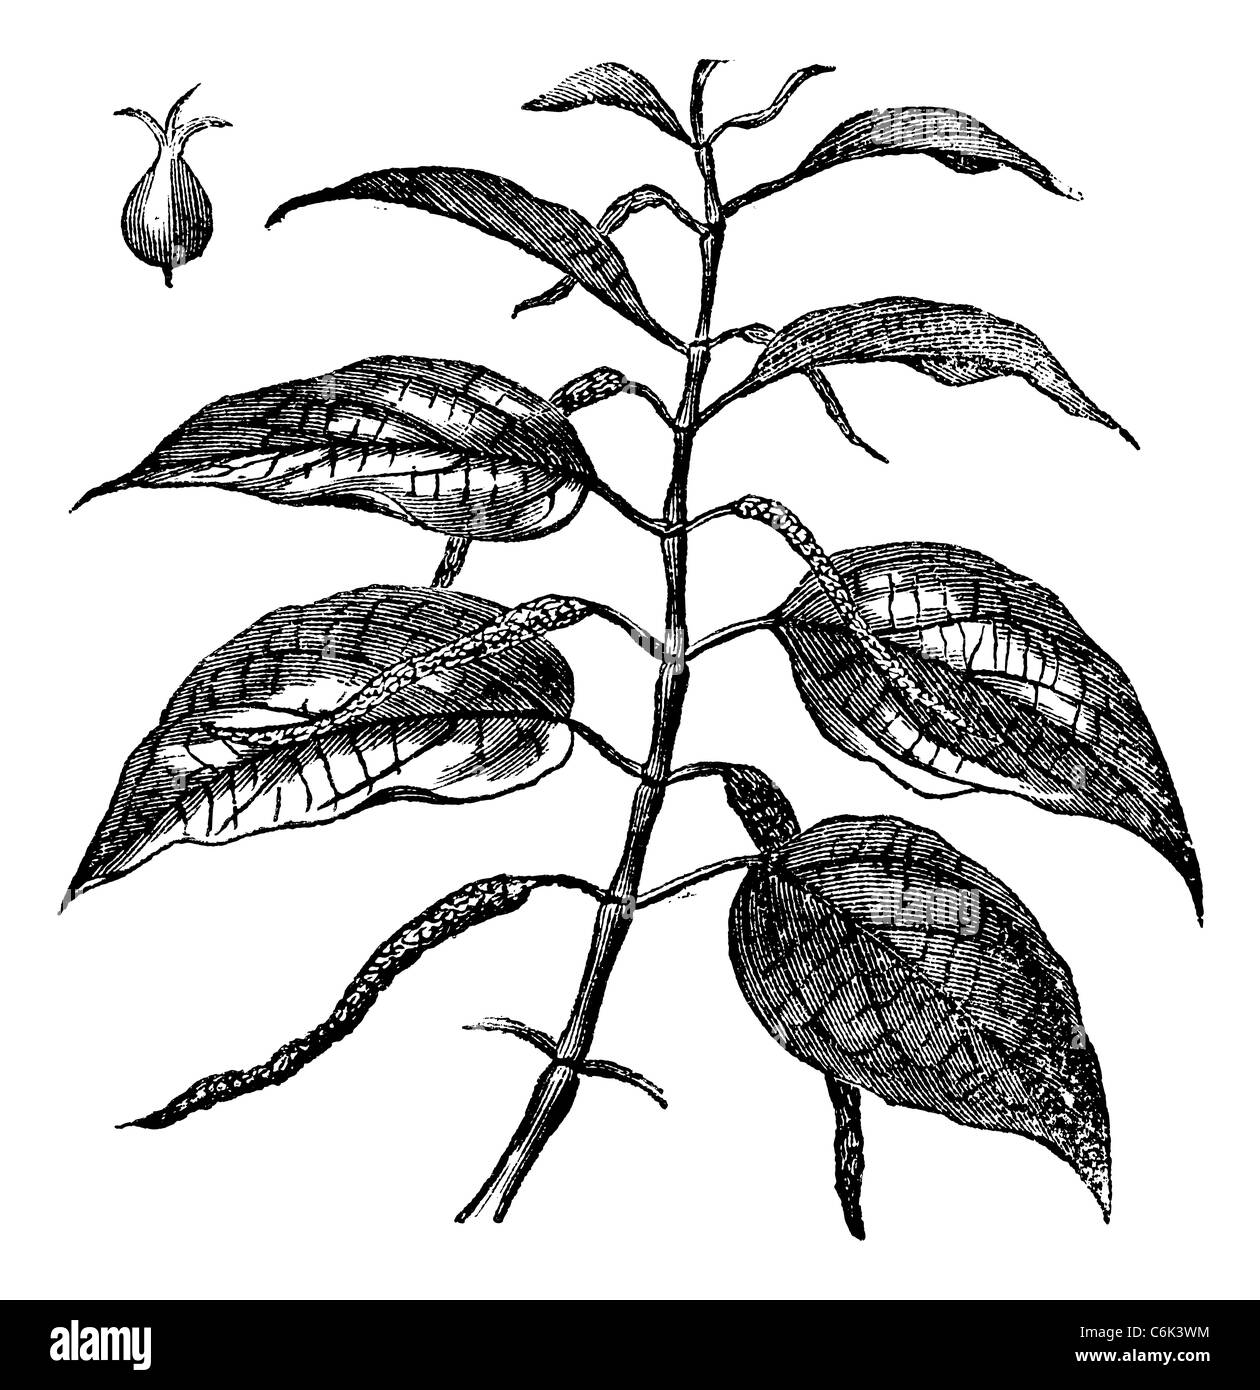 Betel also known as Piper betle, leaves, vintage engraved illustration of Betel leaves. Stock Photo